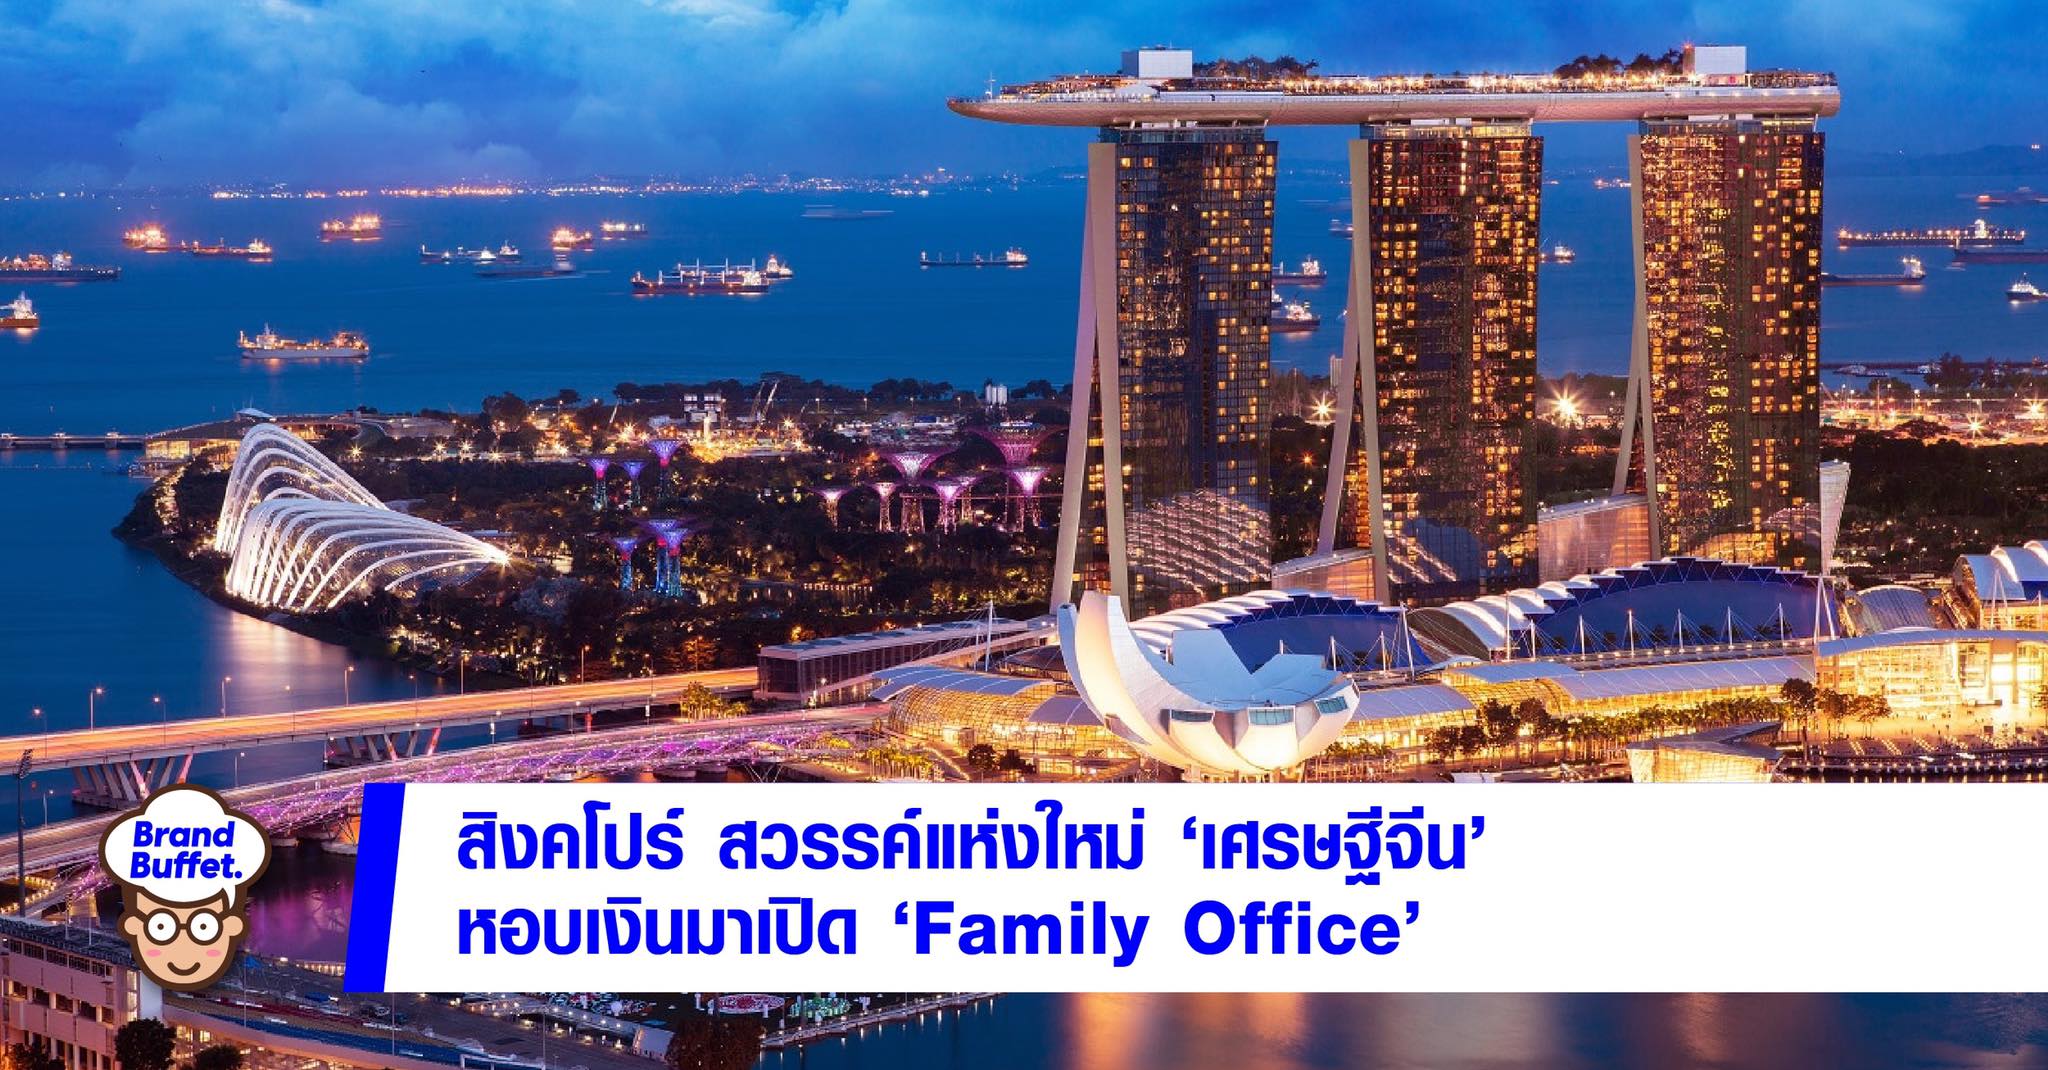 singapore family office